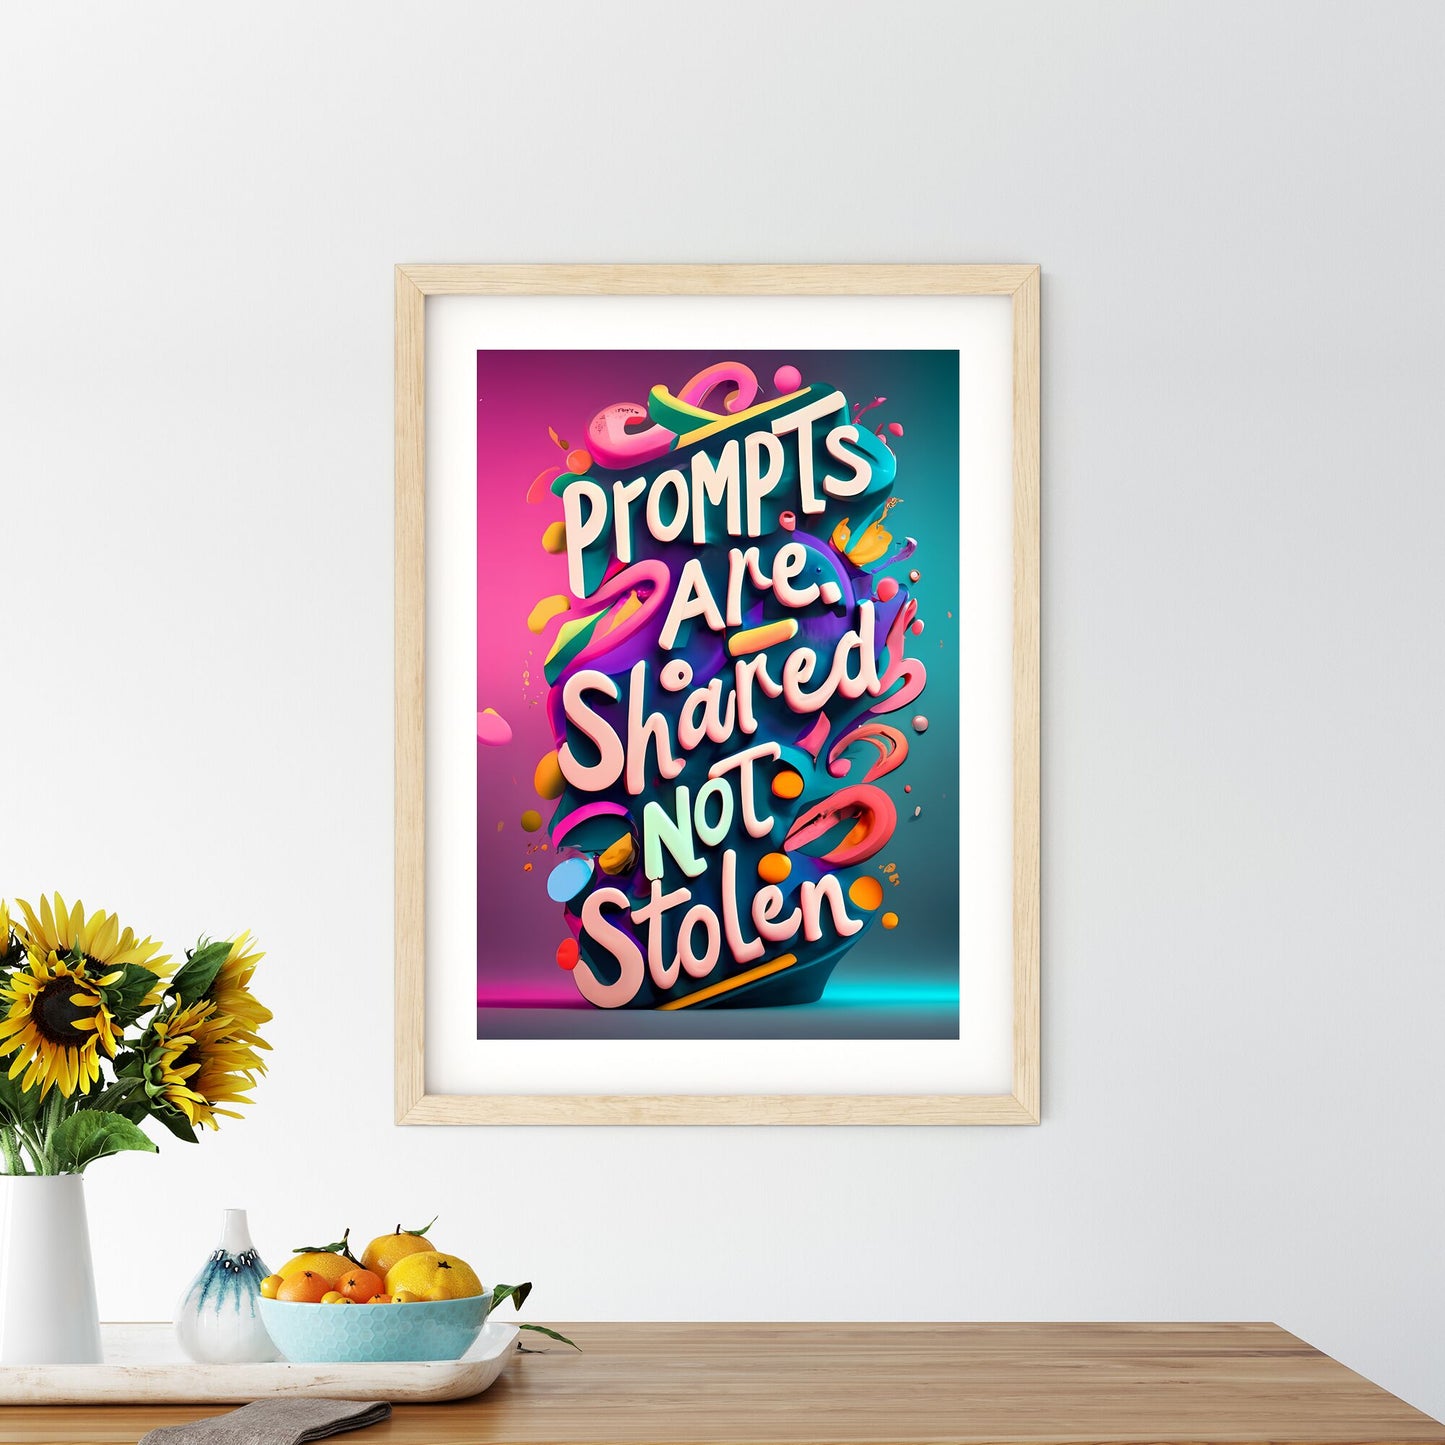 Prompts Are Shared, Not Stolen - A Colorful Text With Confetti Art Print Default Title